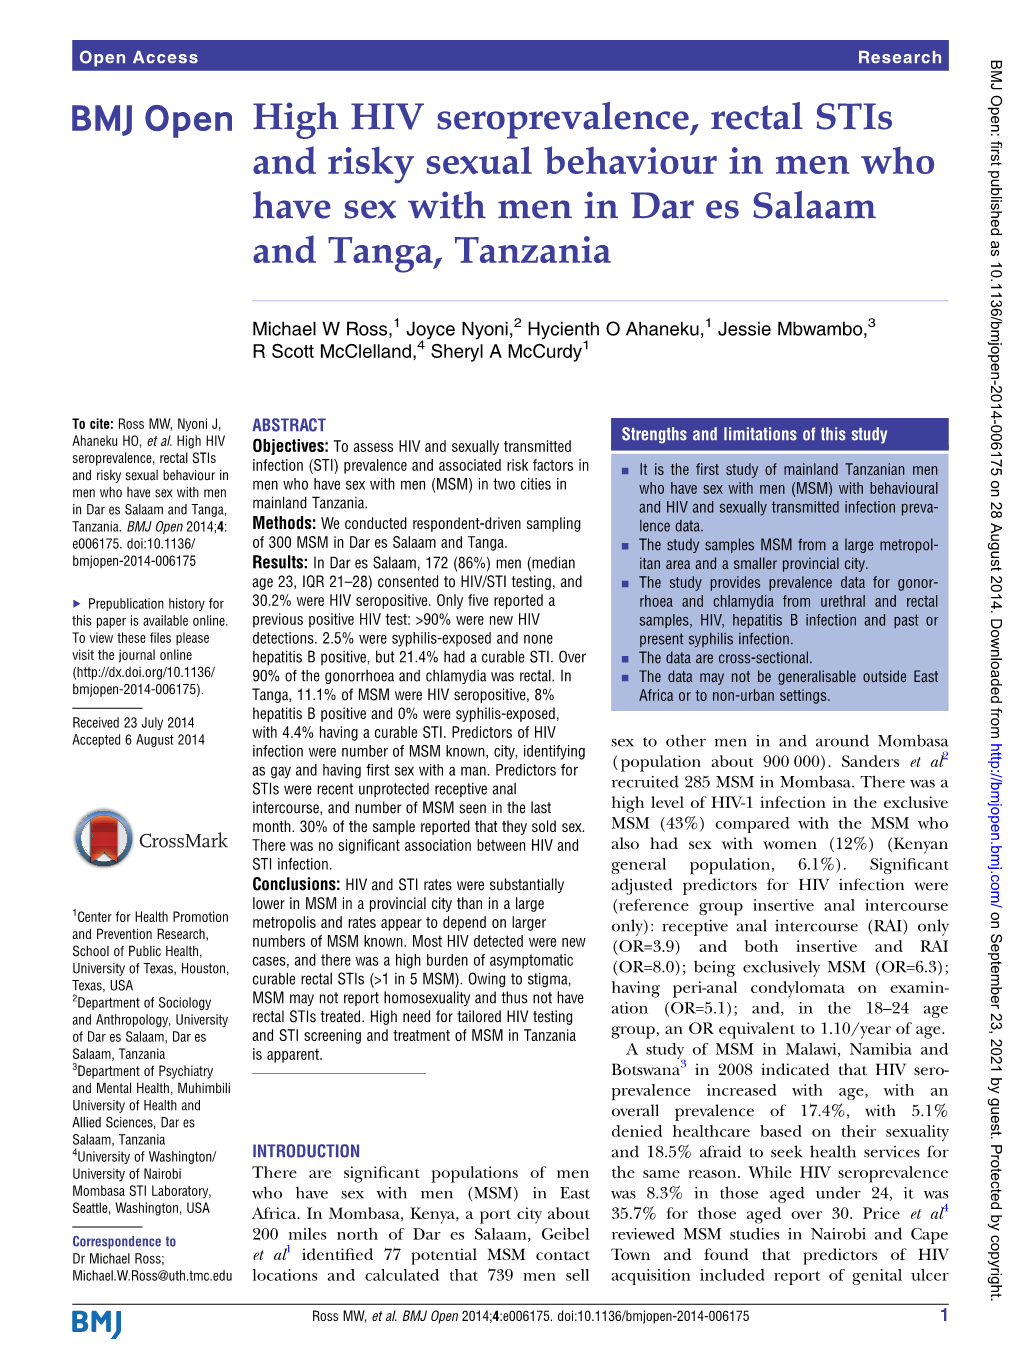 High HIV Seroprevalence, Rectal Stis and Risky Sexual Behaviour in Men Who Have Sex with Men in Dar Es Salaam and Tanga, Tanzania